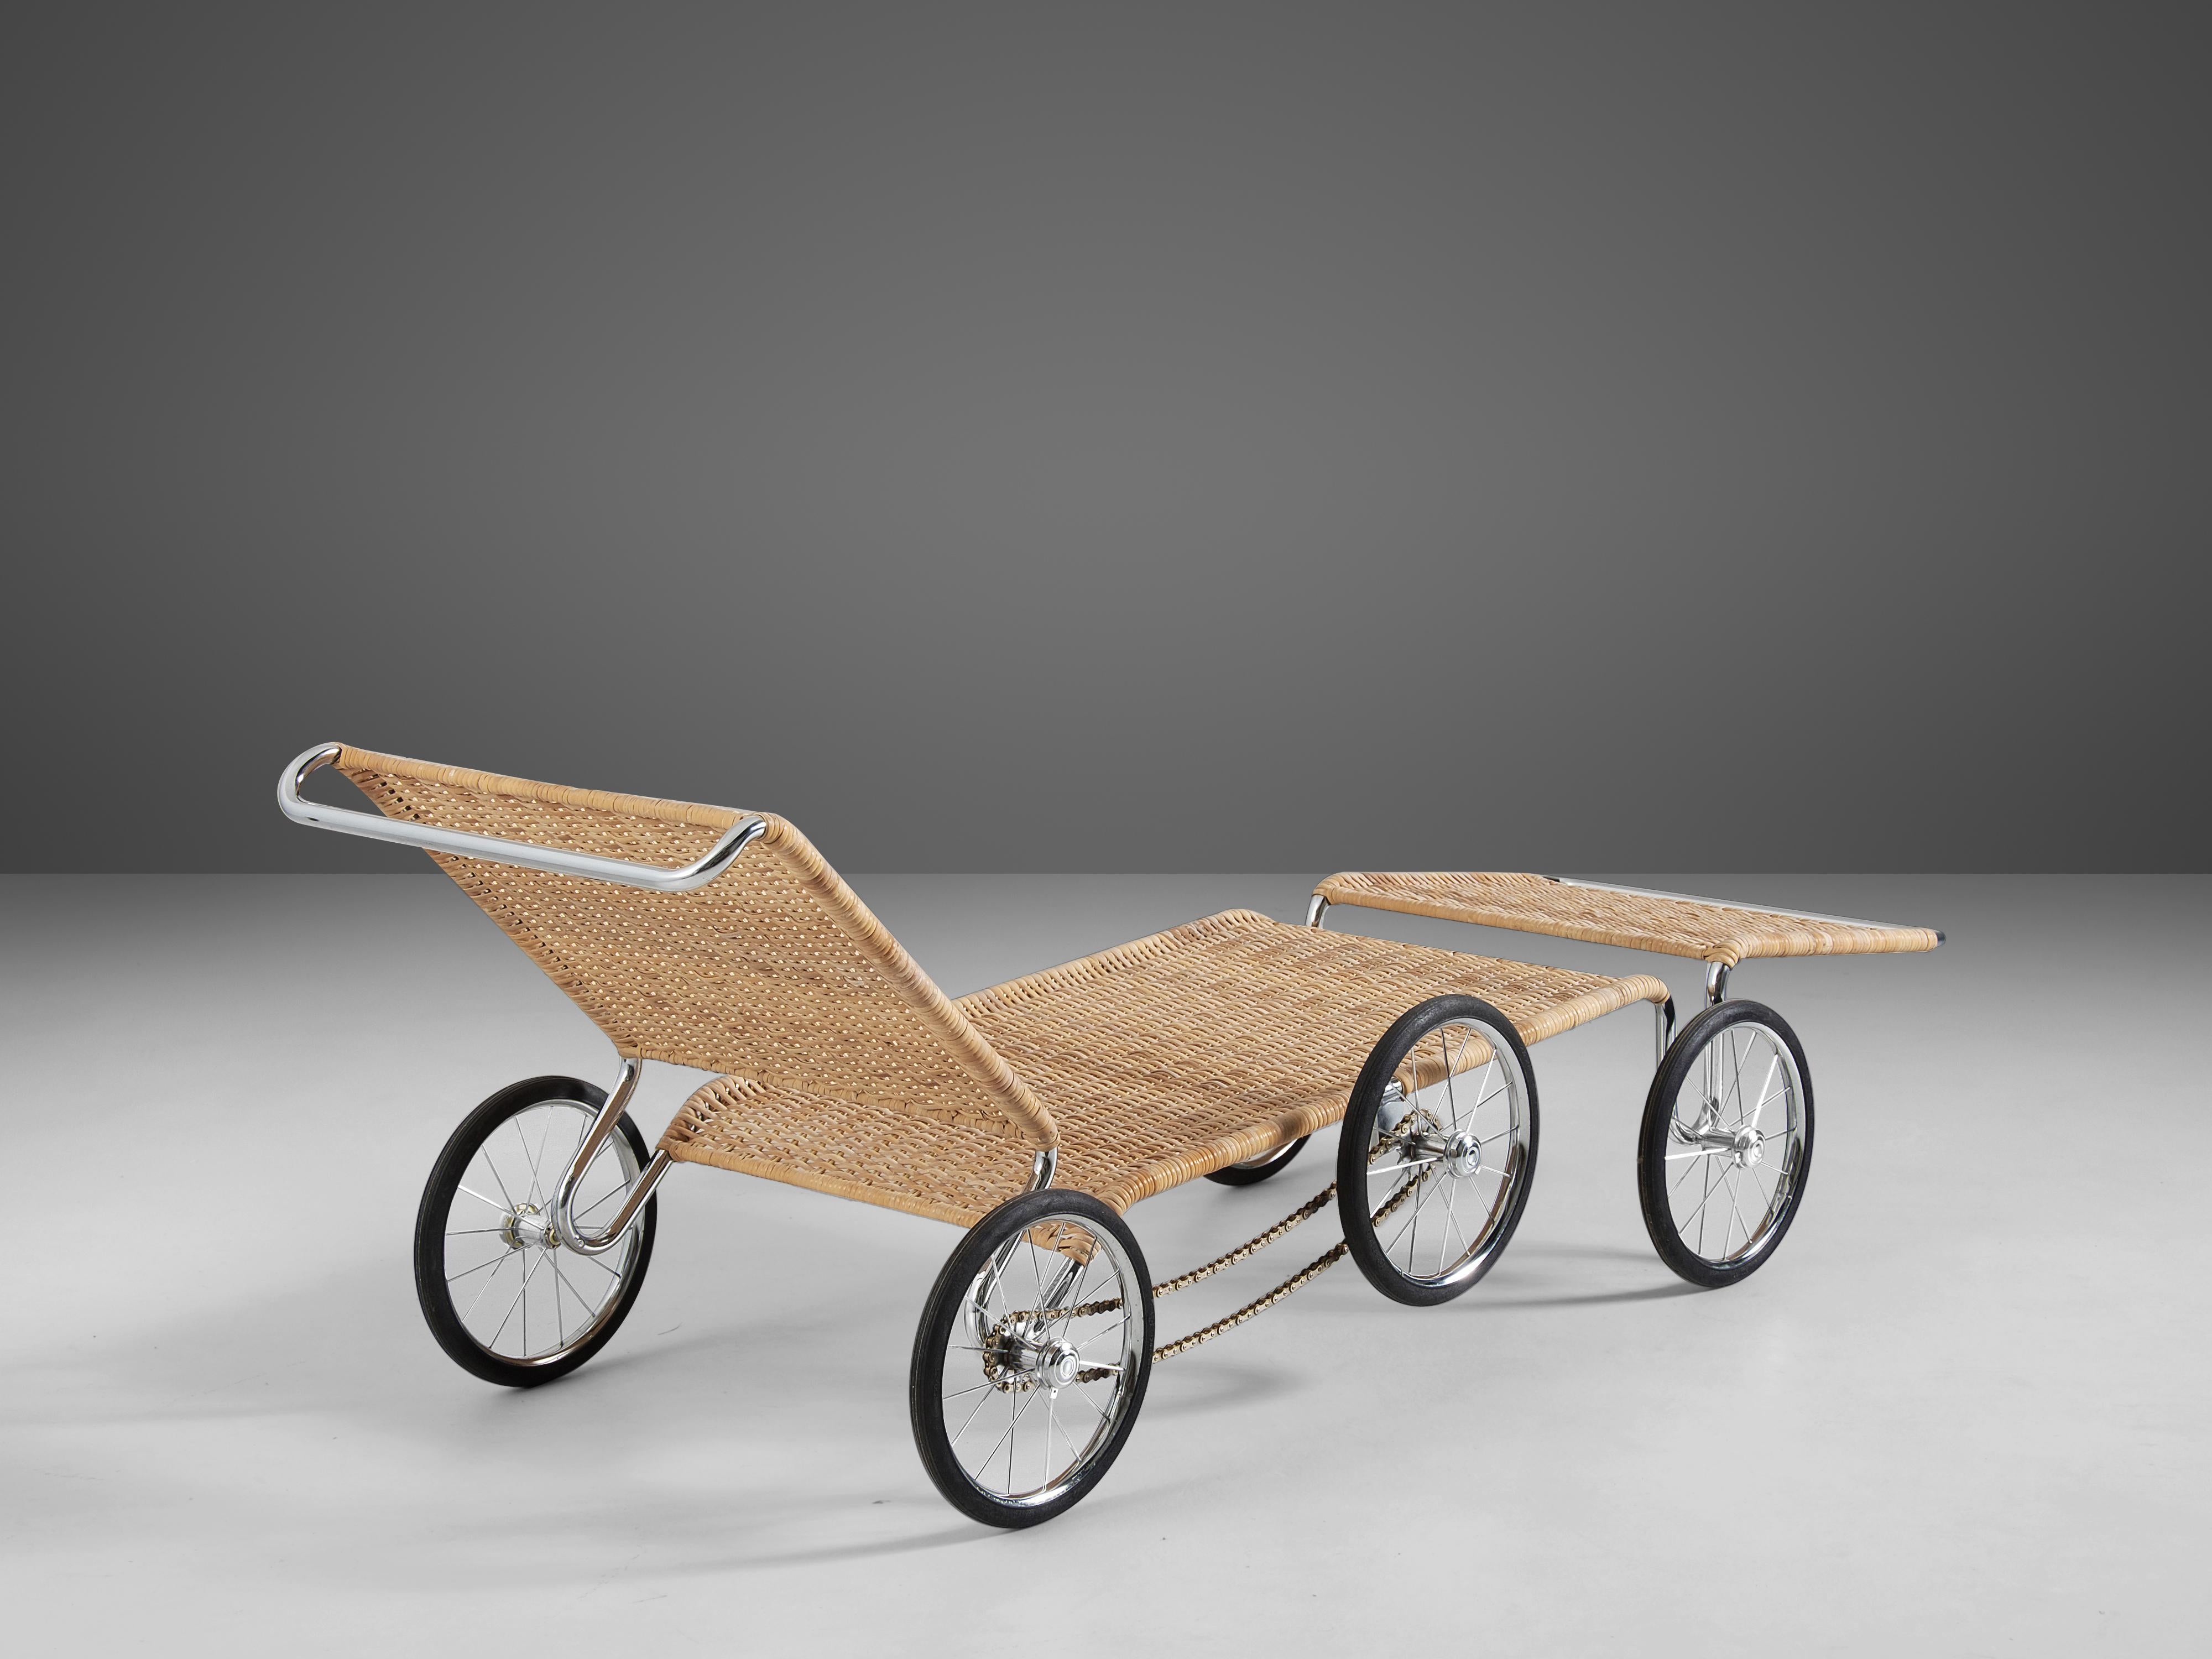 Marcel Breuer for Tecta, chaise loungeF41E, steel, wicker, Germany, 1980s

The design of the iconic F41 chaise lounge on wheels dates back to the year 1928 when Marcel Breuer drew the first sketches. In the time when tubular steel got introduced